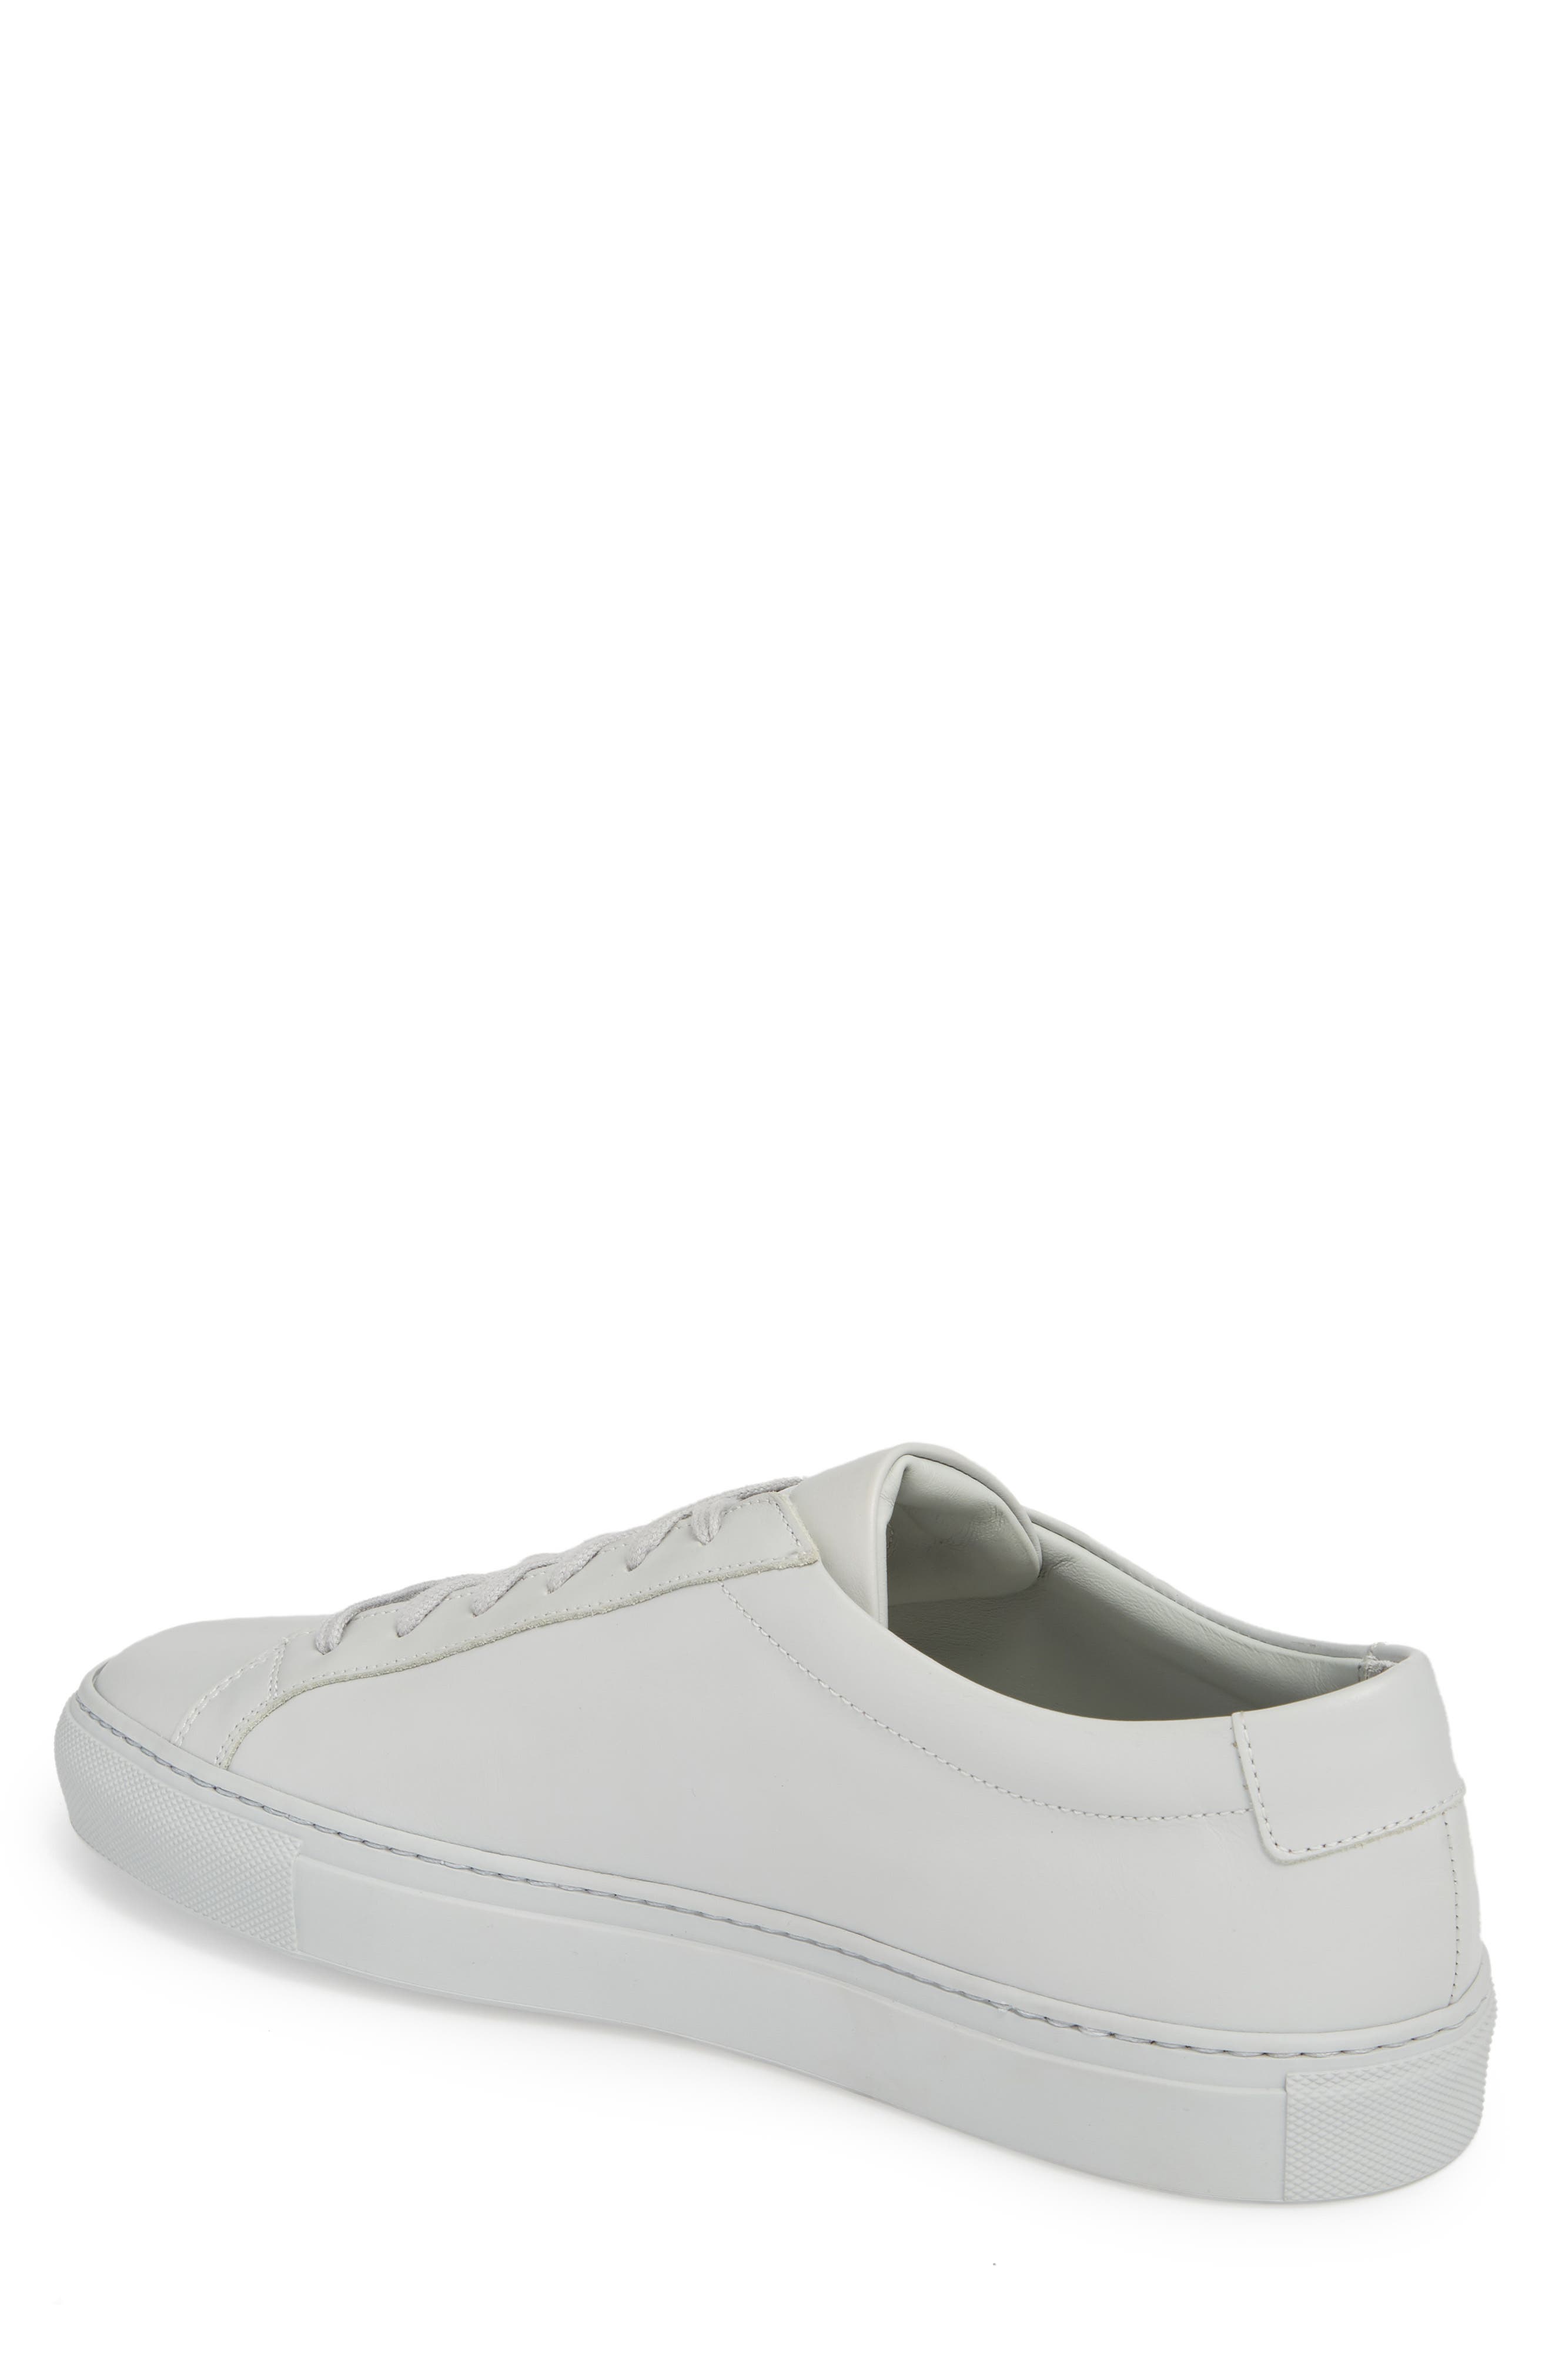 common projects nordstrom canada